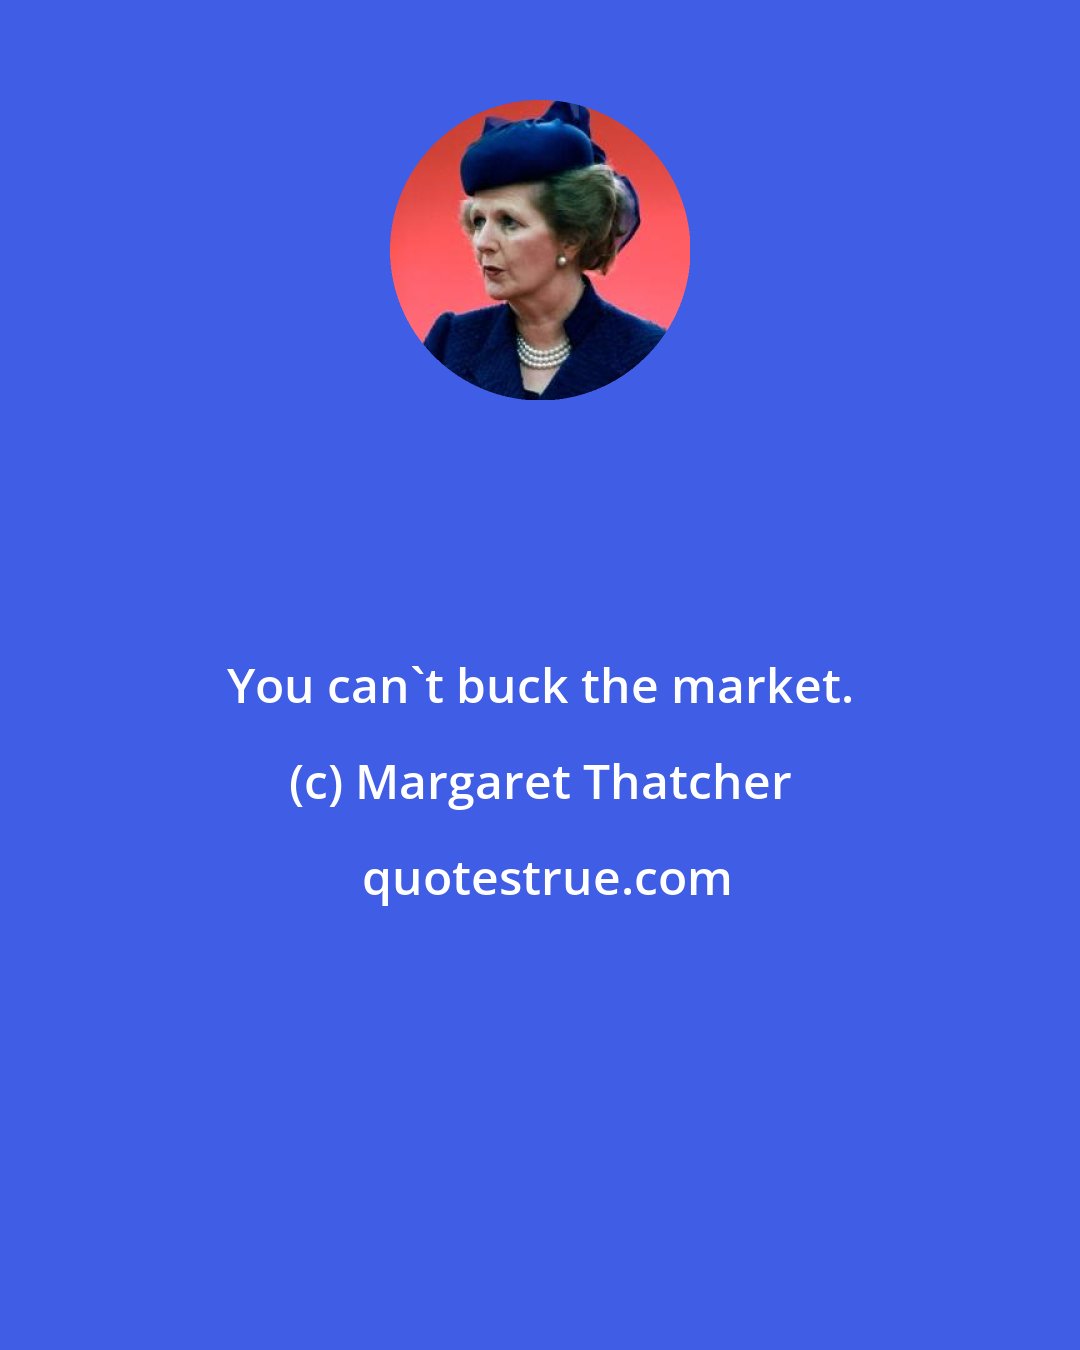 Margaret Thatcher: You can't buck the market.